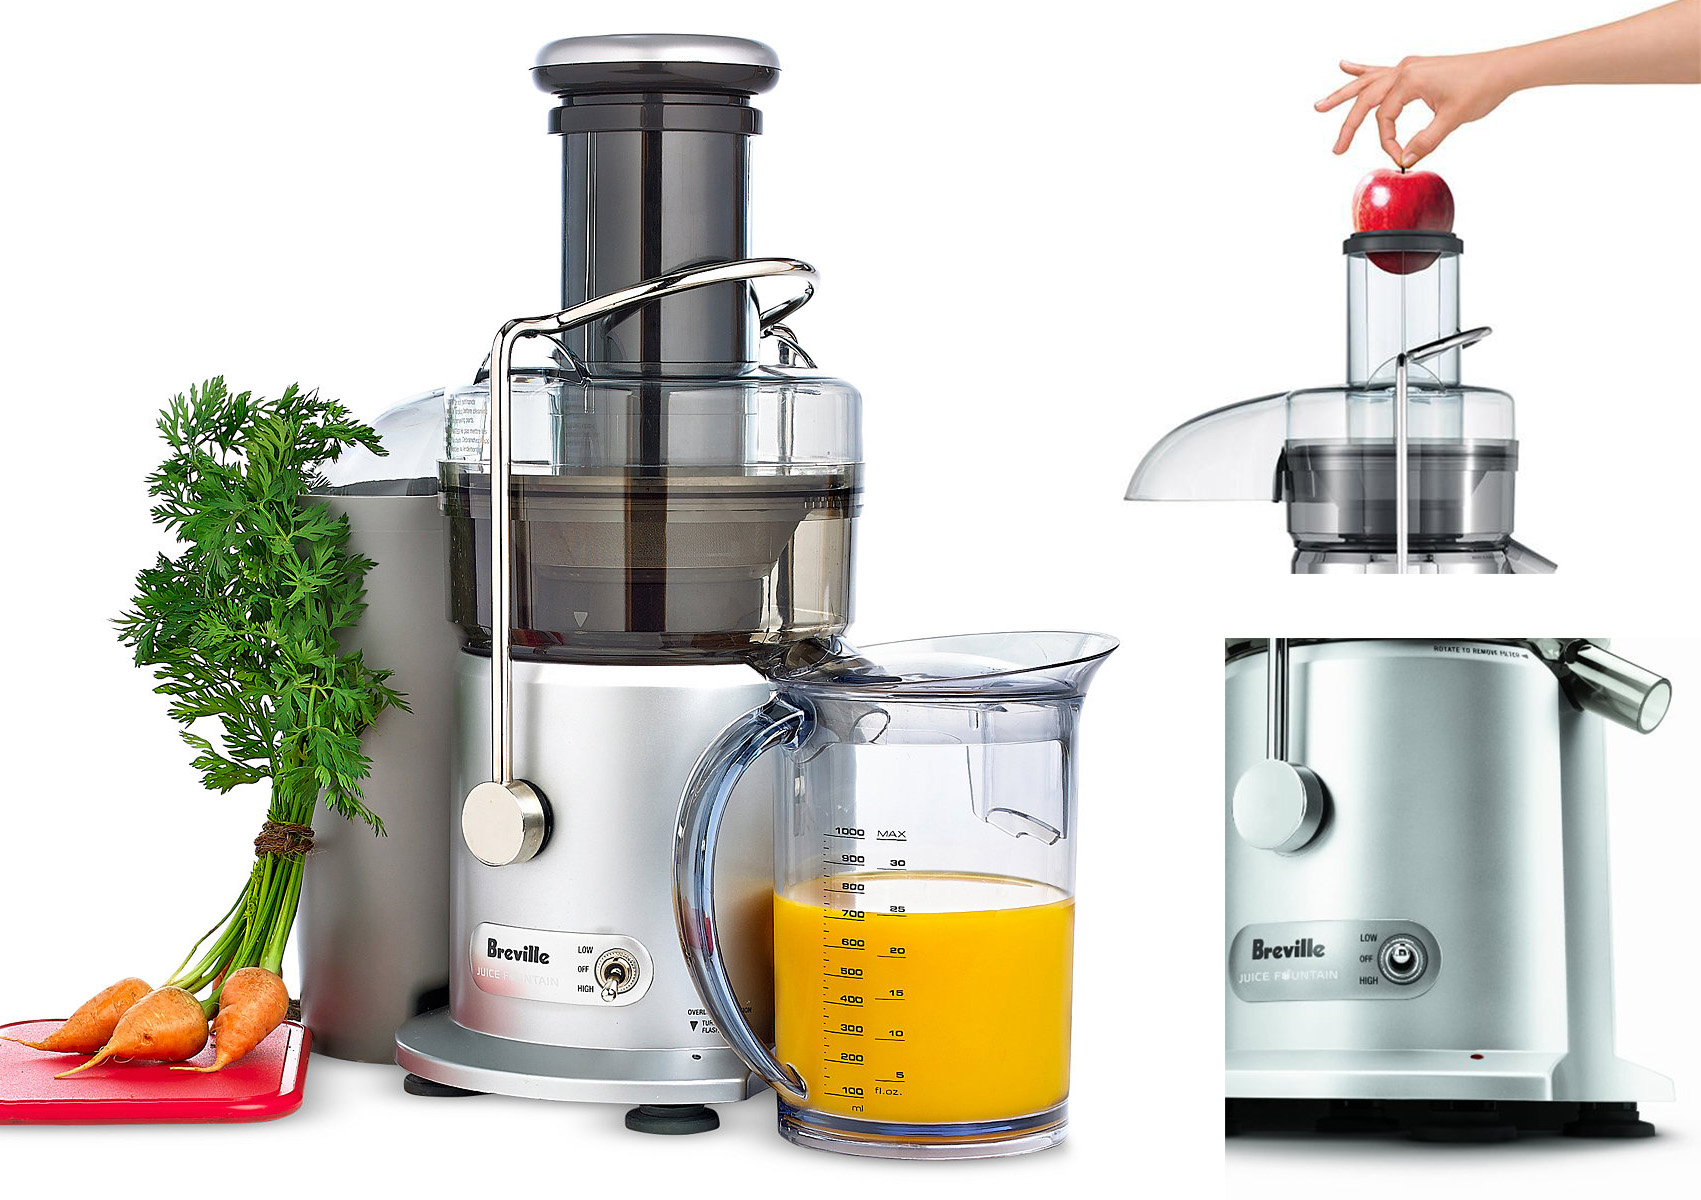 Breville, JE98XL, Review, Juicer Portal, Squeezing the juice out of life, Centrifugal Juicer